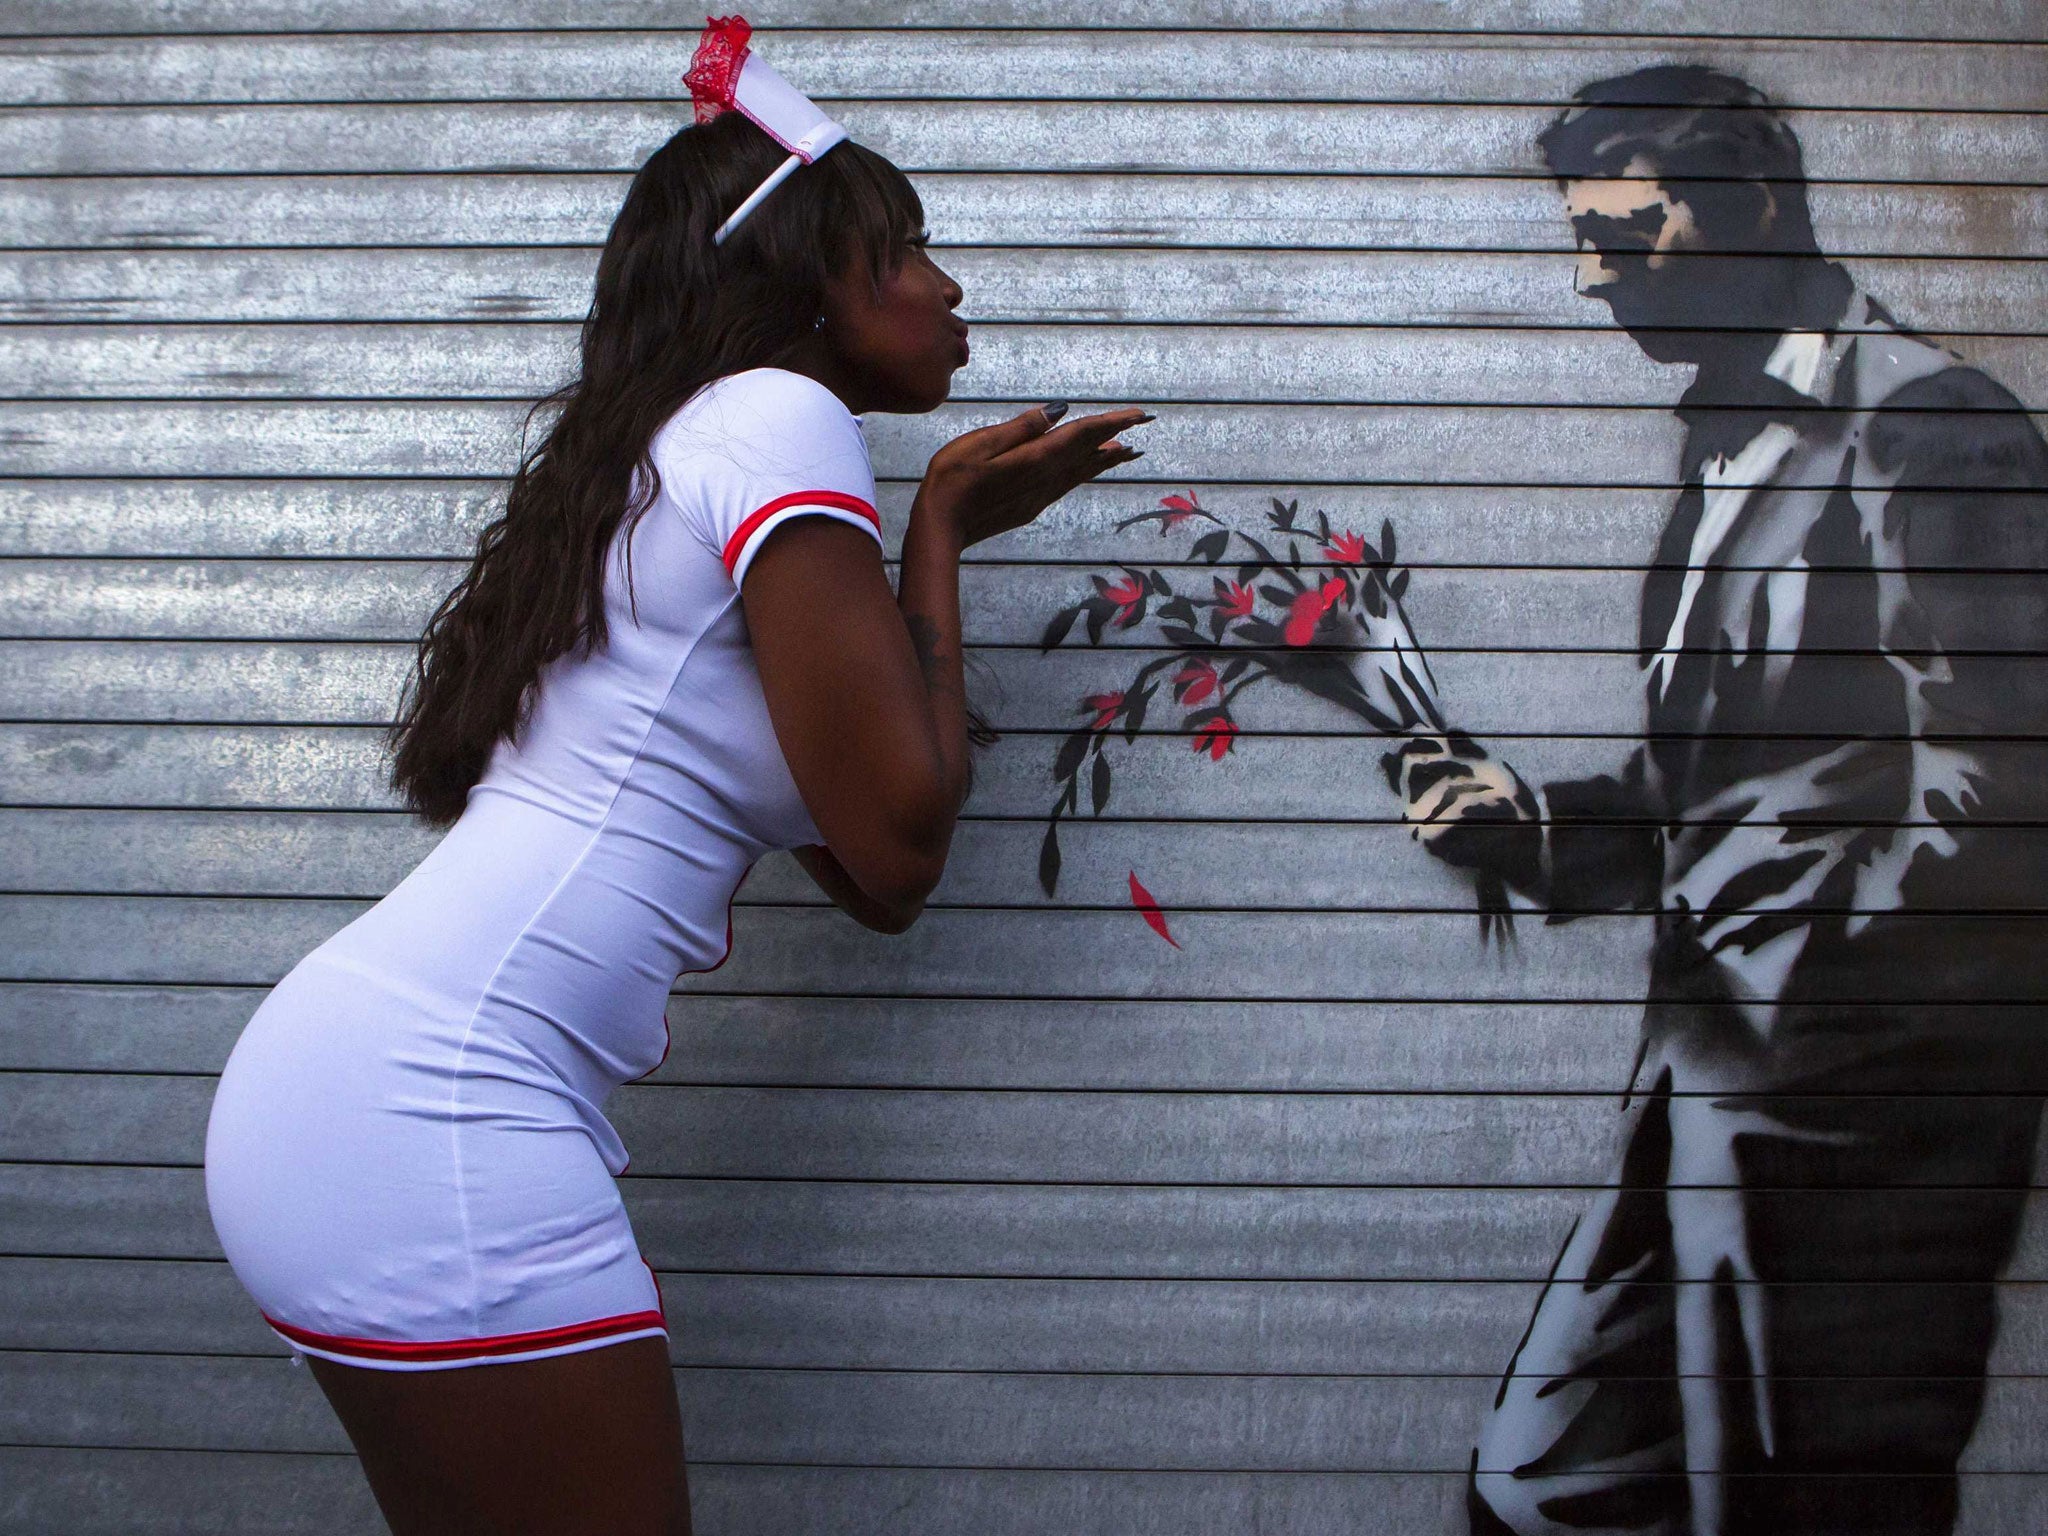 A dancer poses with a new piece of art by Banksy